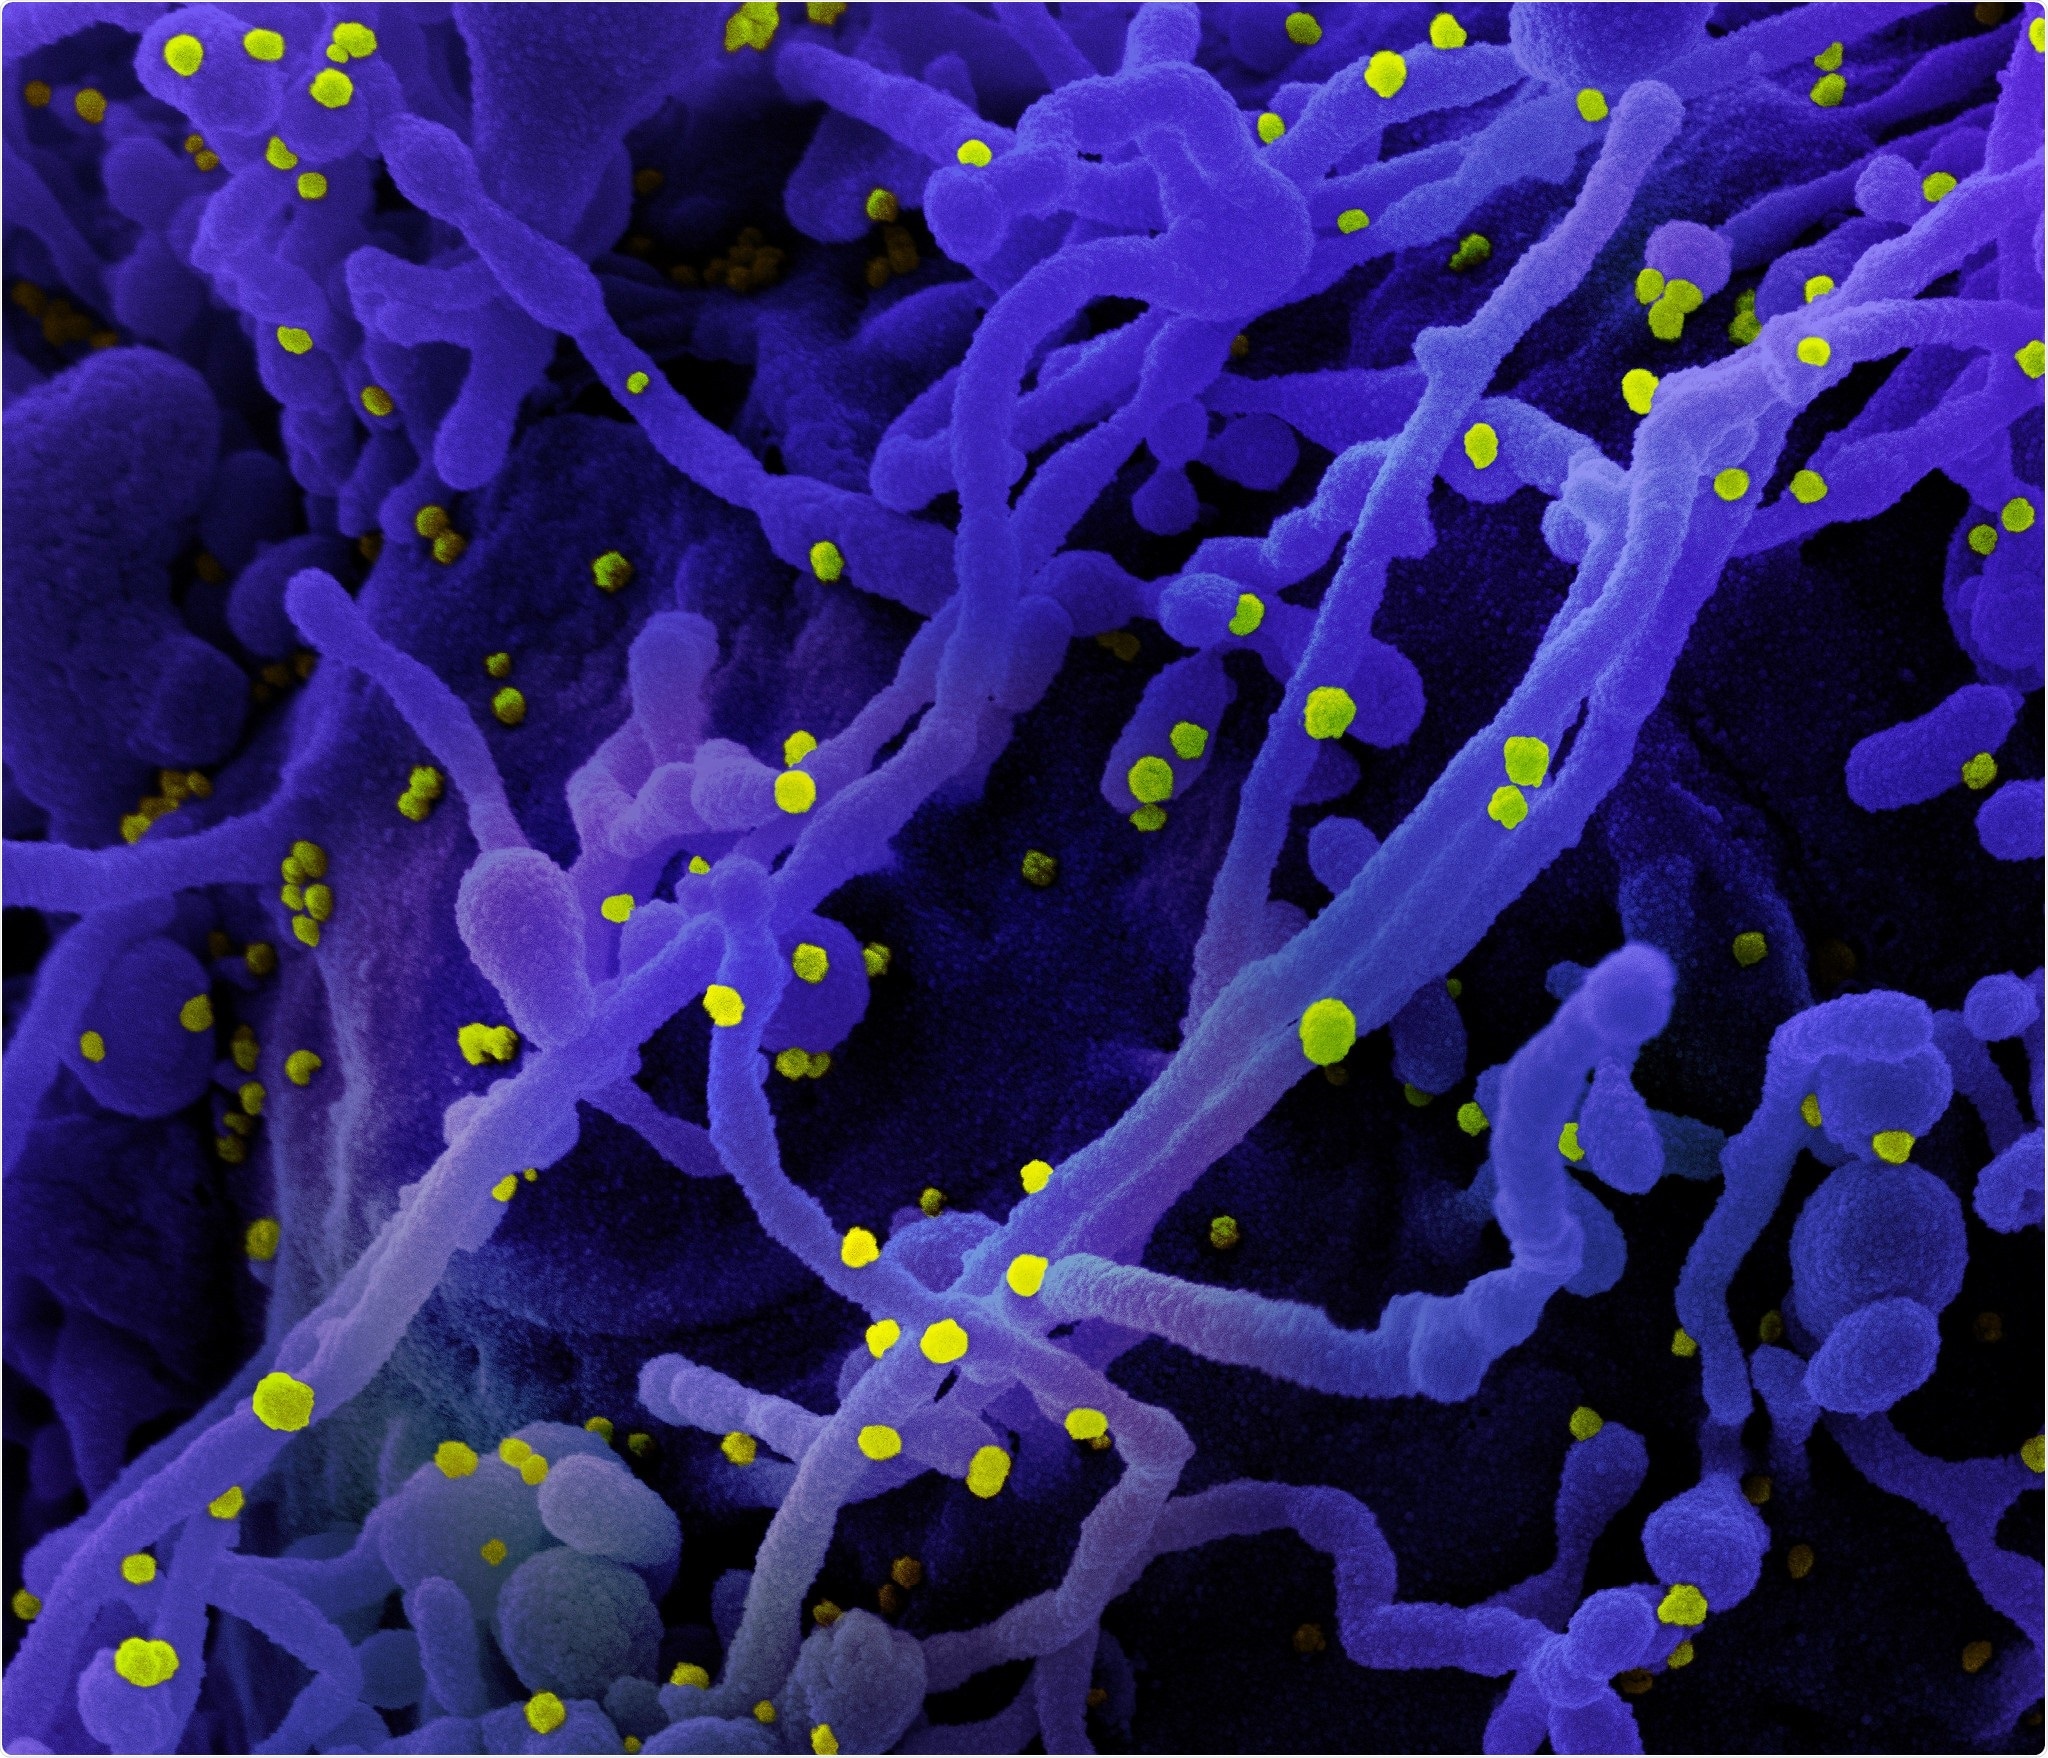 Novel Coronavirus SARS-CoV-2 Colorized scanning electron micrograph of a cell (purple) infected with SARS-COV-2 virus particles (yellow), isolated from a patient sample. Image captured at the NIAID Integrated Research Facility (IRF) in Fort Detrick, Maryland. Credit: NIAID